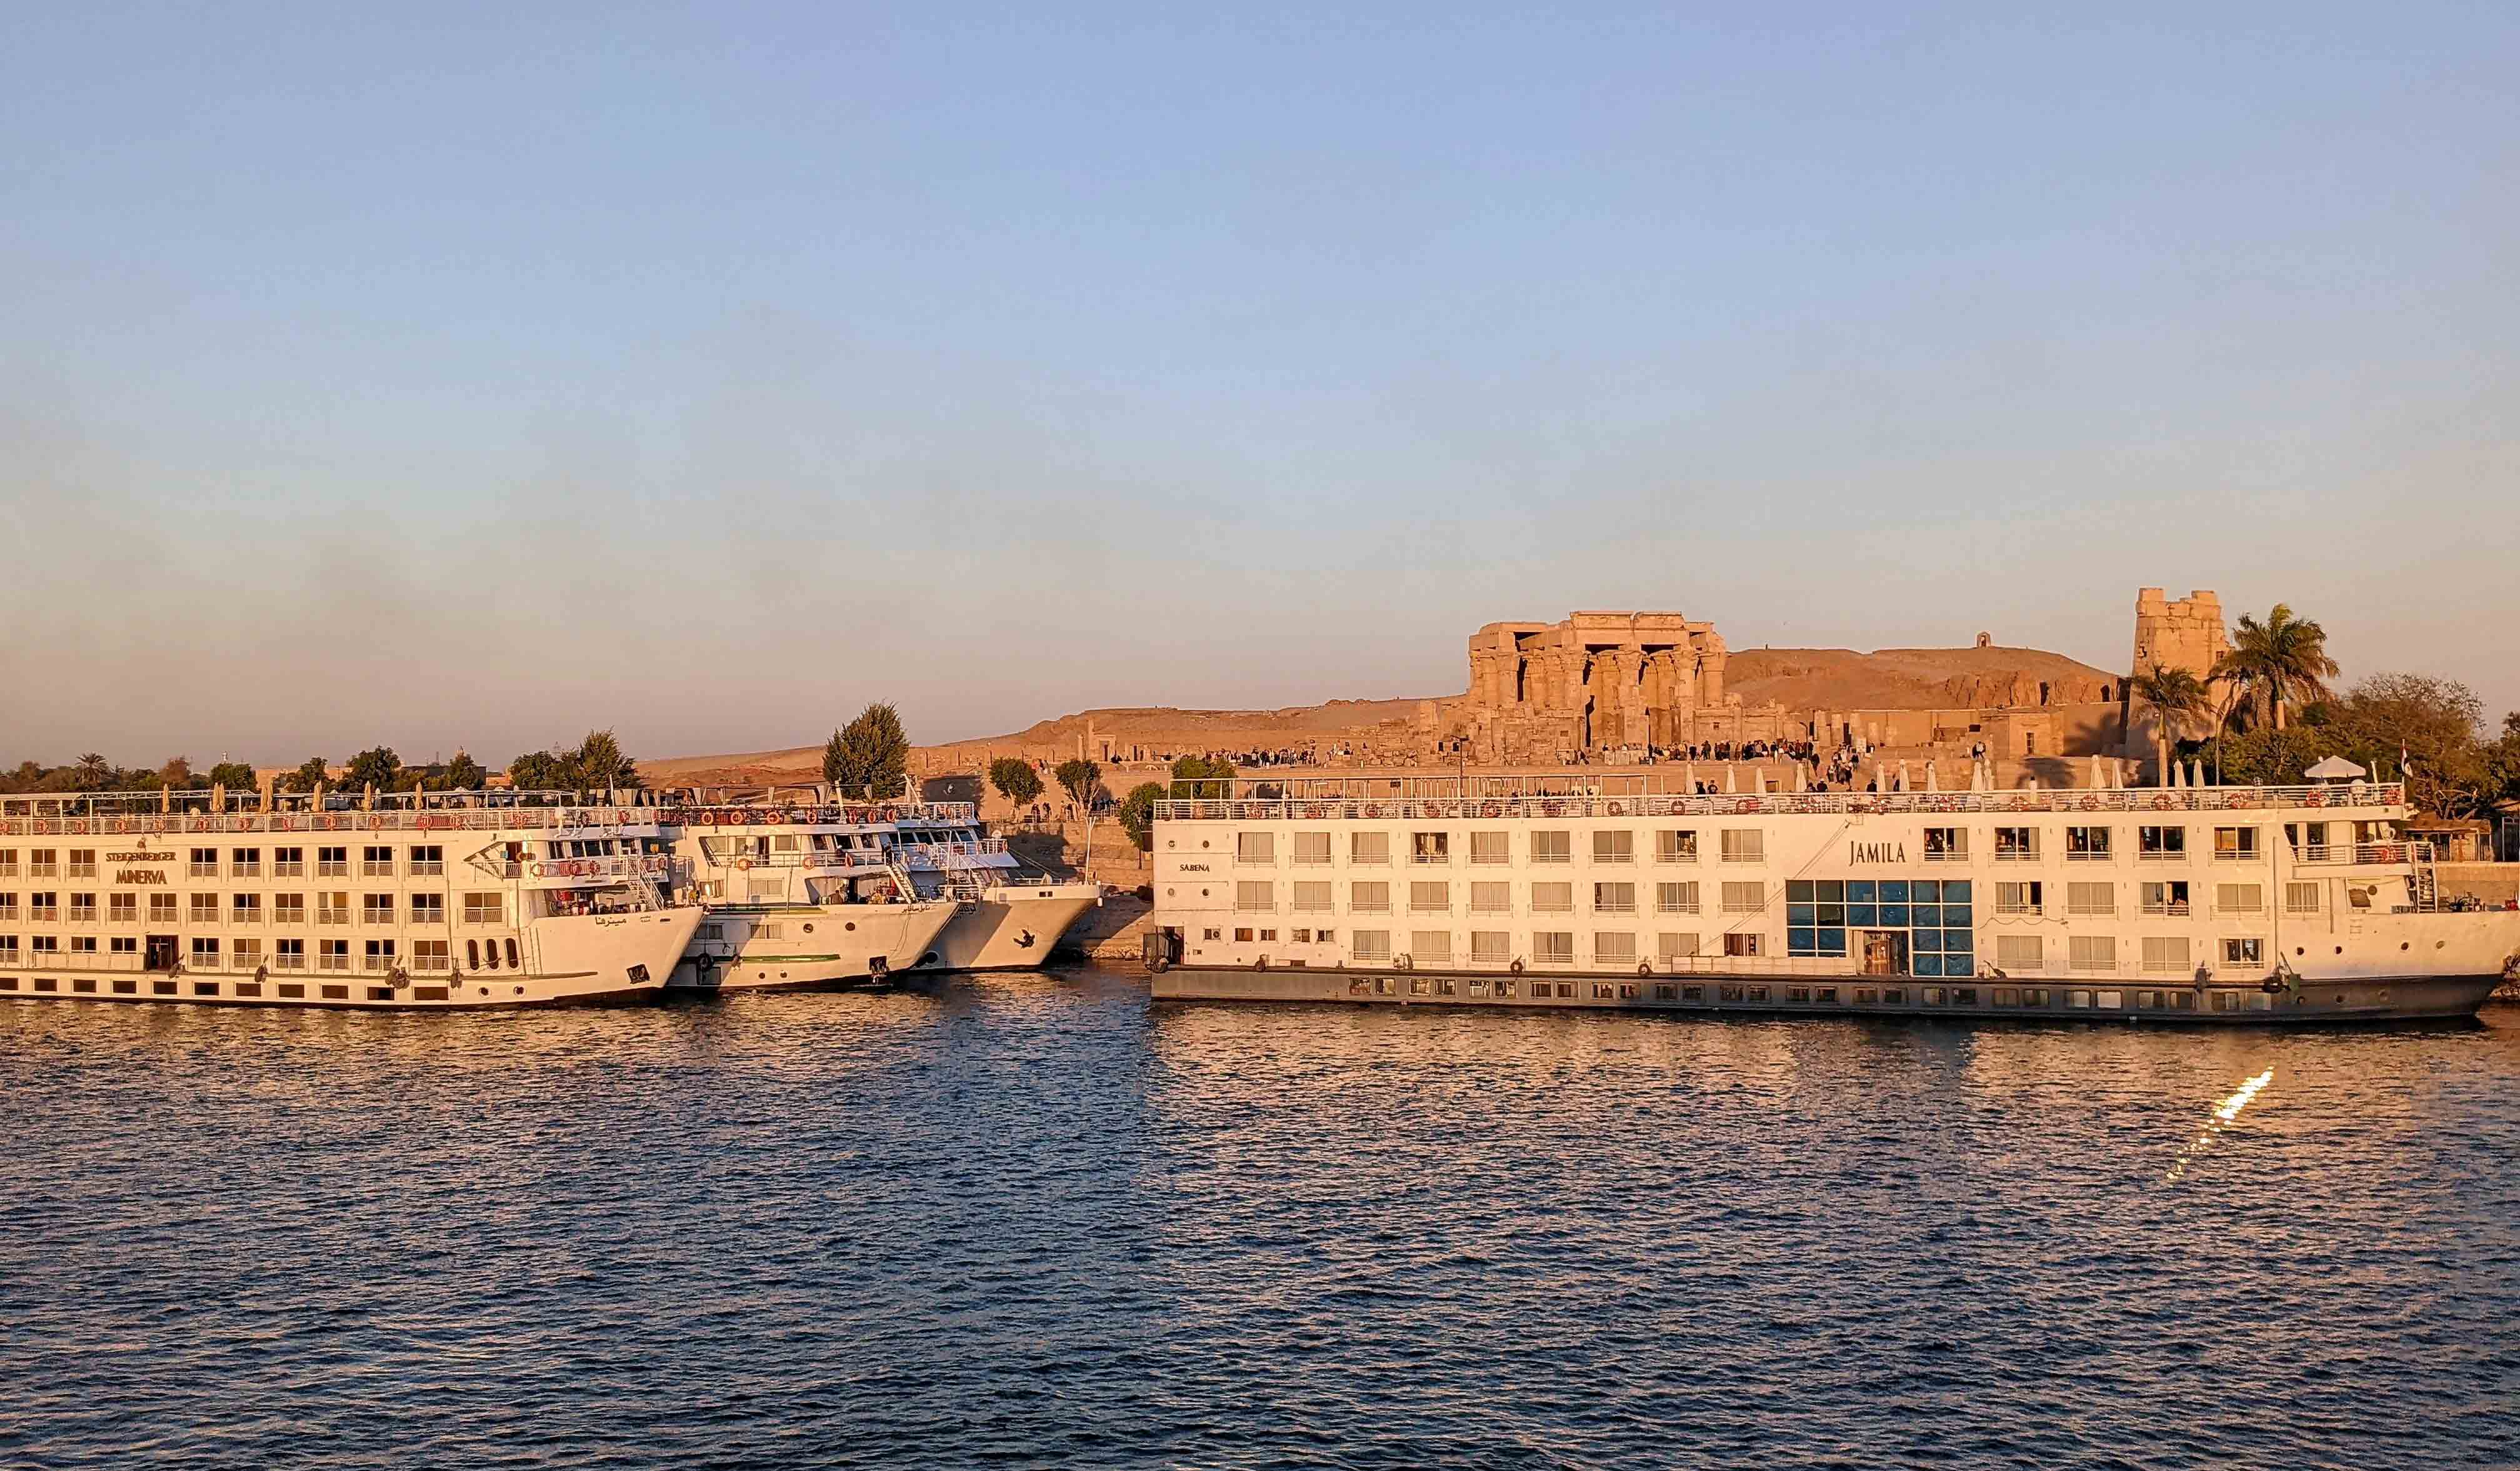 View of Egypt’s Temple of Kom Ombo, along with Nile cruise ships